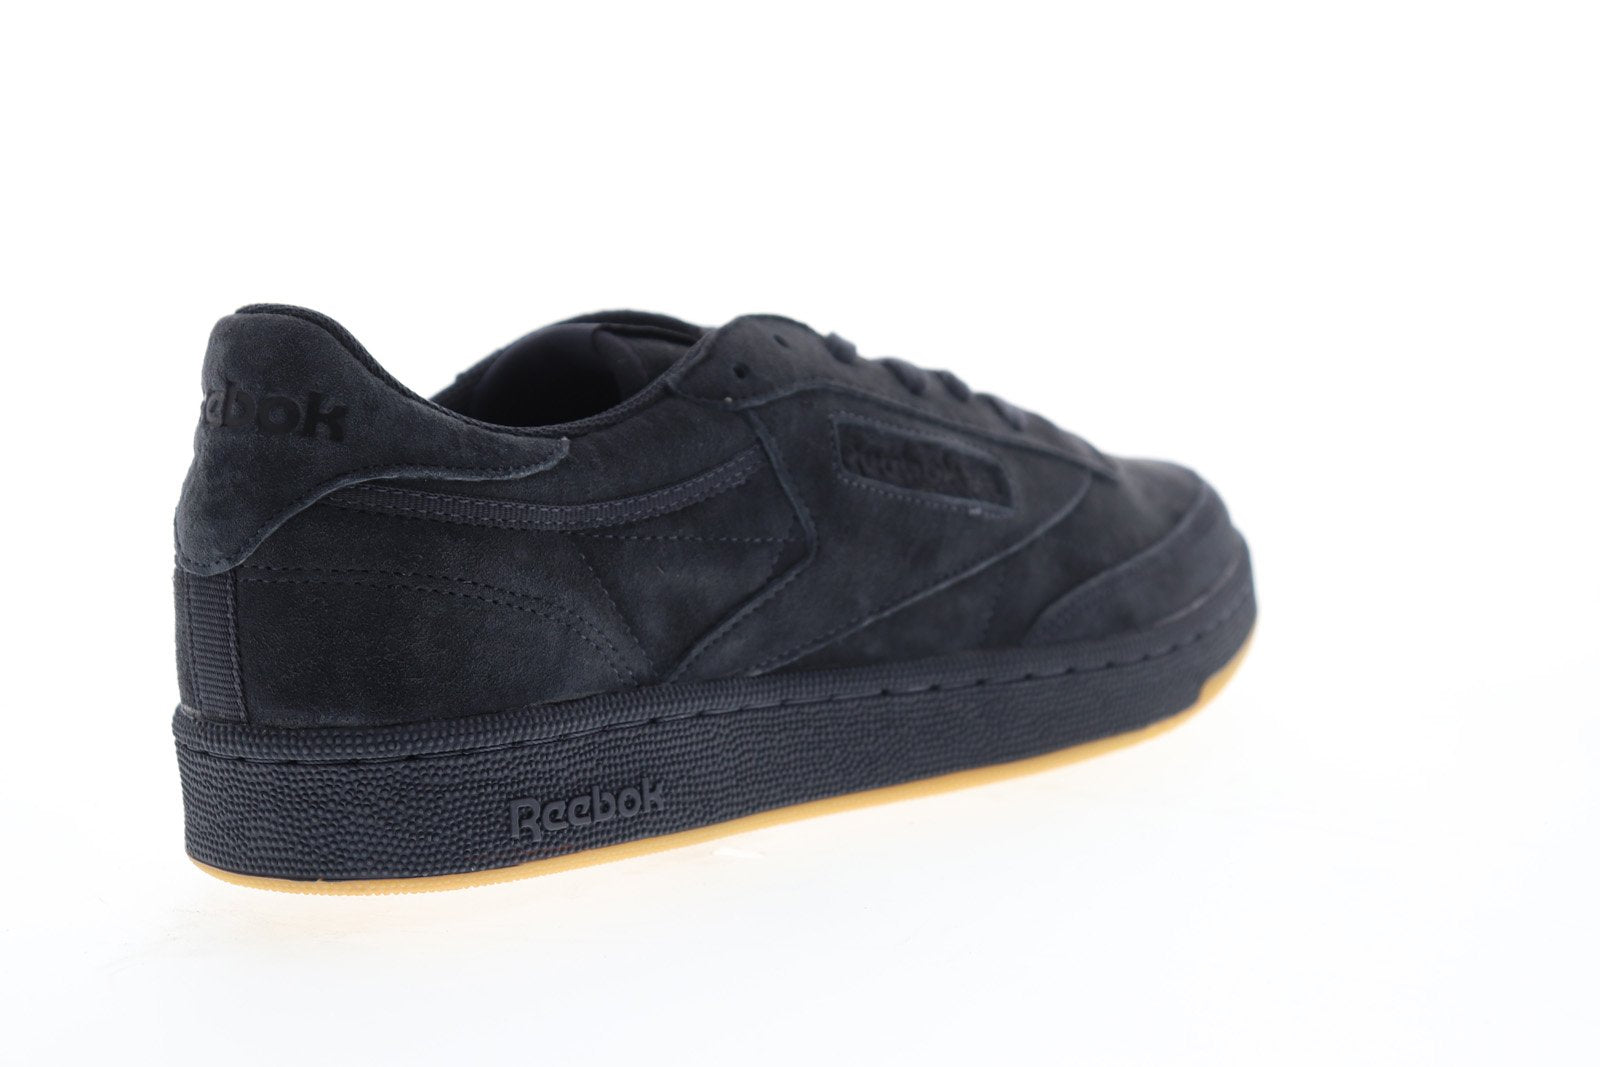 Reebok C 85 TG BD1885 Mens Black Suede Casual Lifestyle Sneakers - Shoes